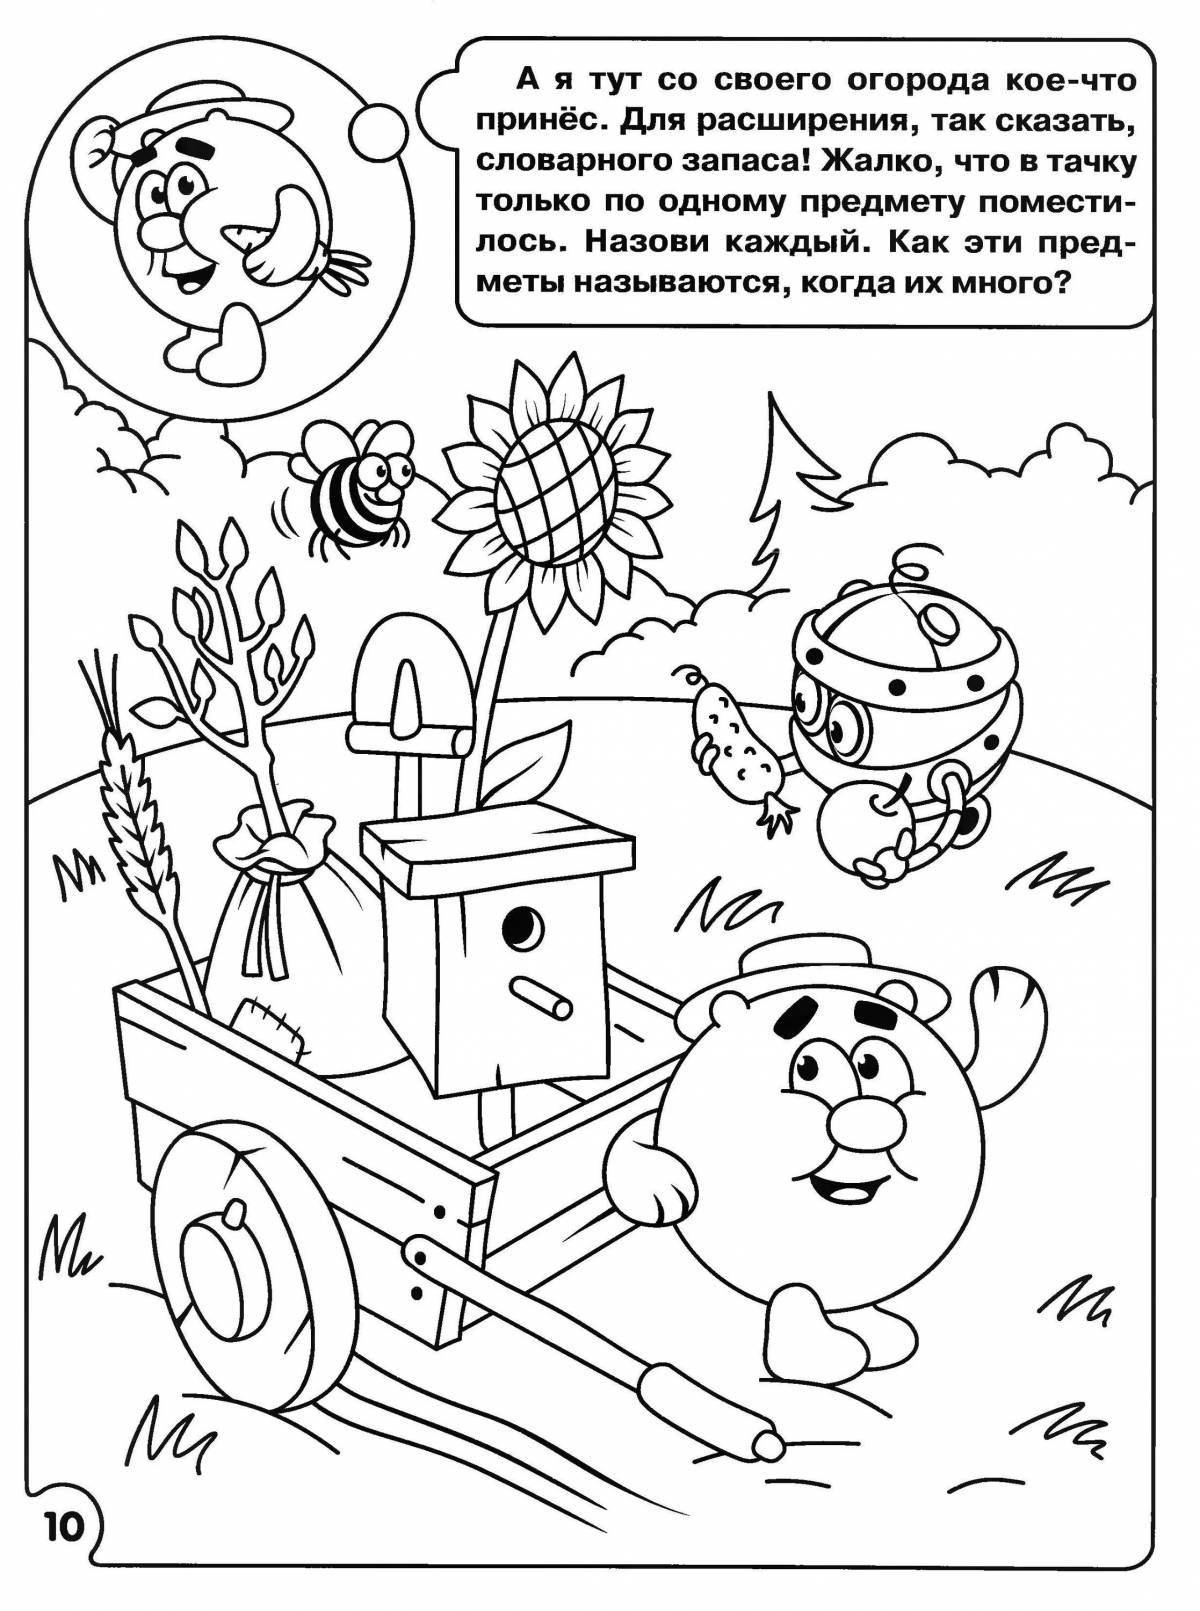 Gorgeous smart smeshariki coloring pages